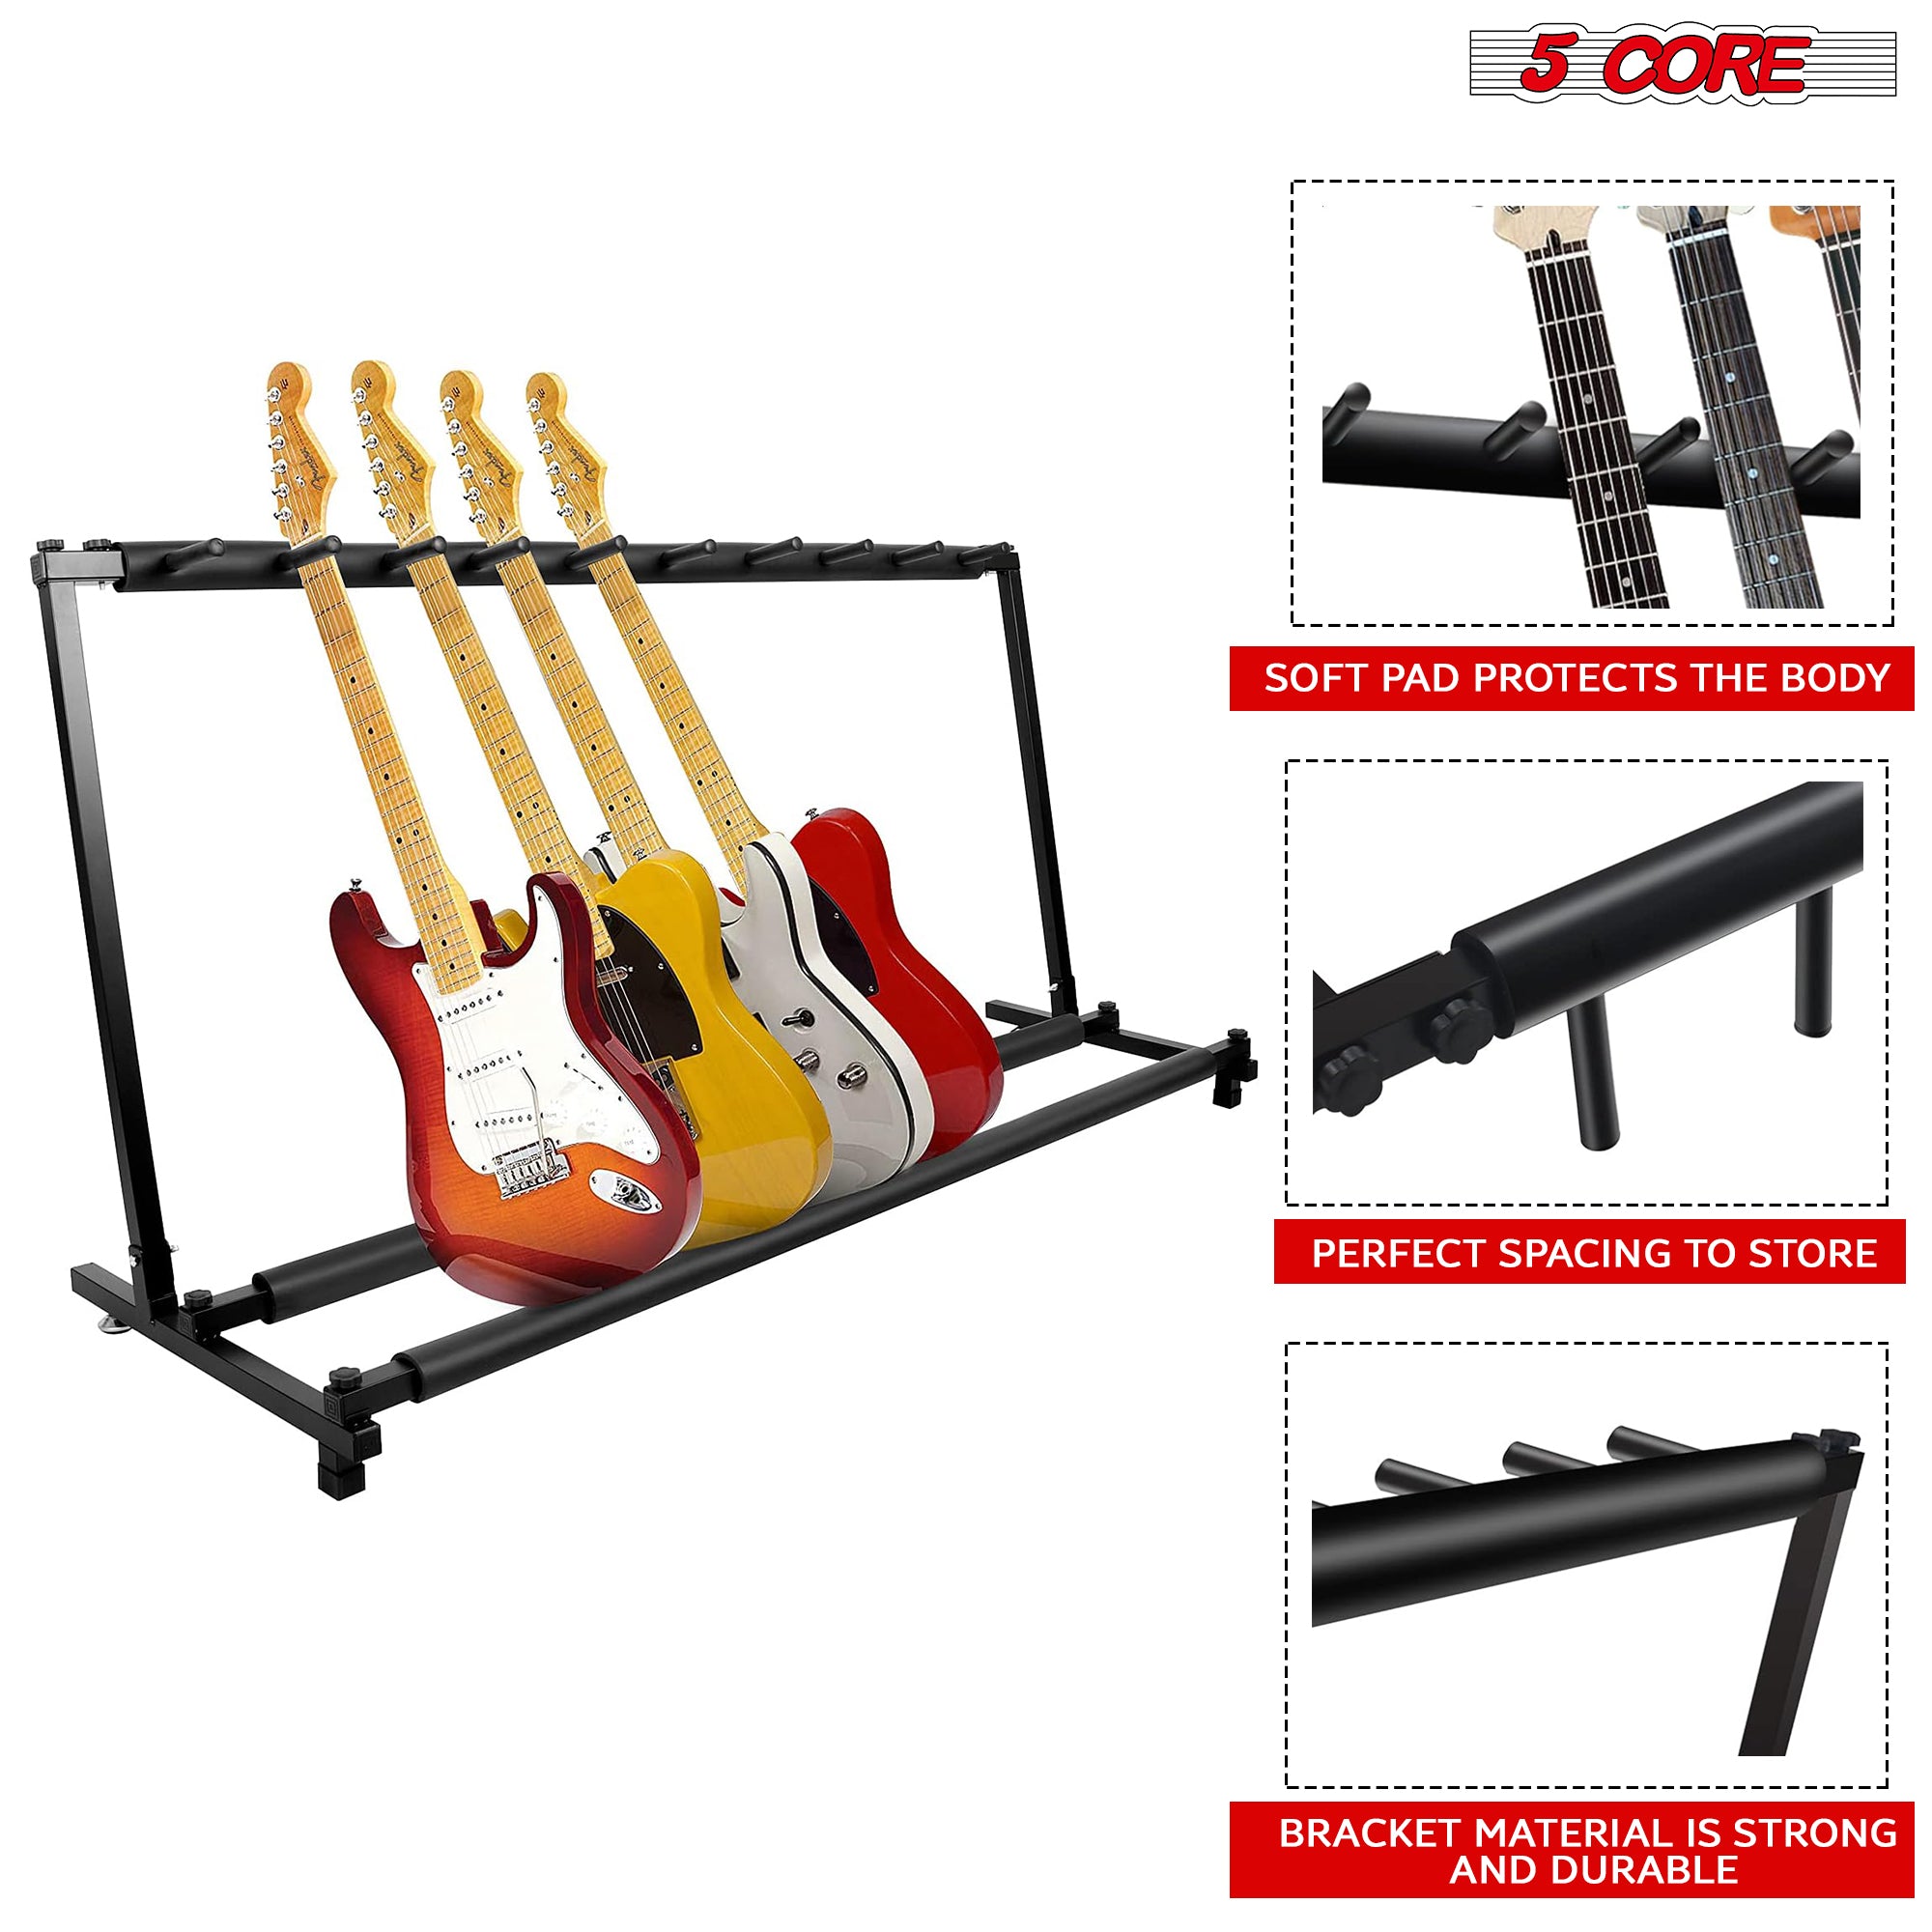 5 Core Guitar Stand 9 Space Rack for Acoustic Electric Bass Guitar • Foam Padded Multi Guitar Holder